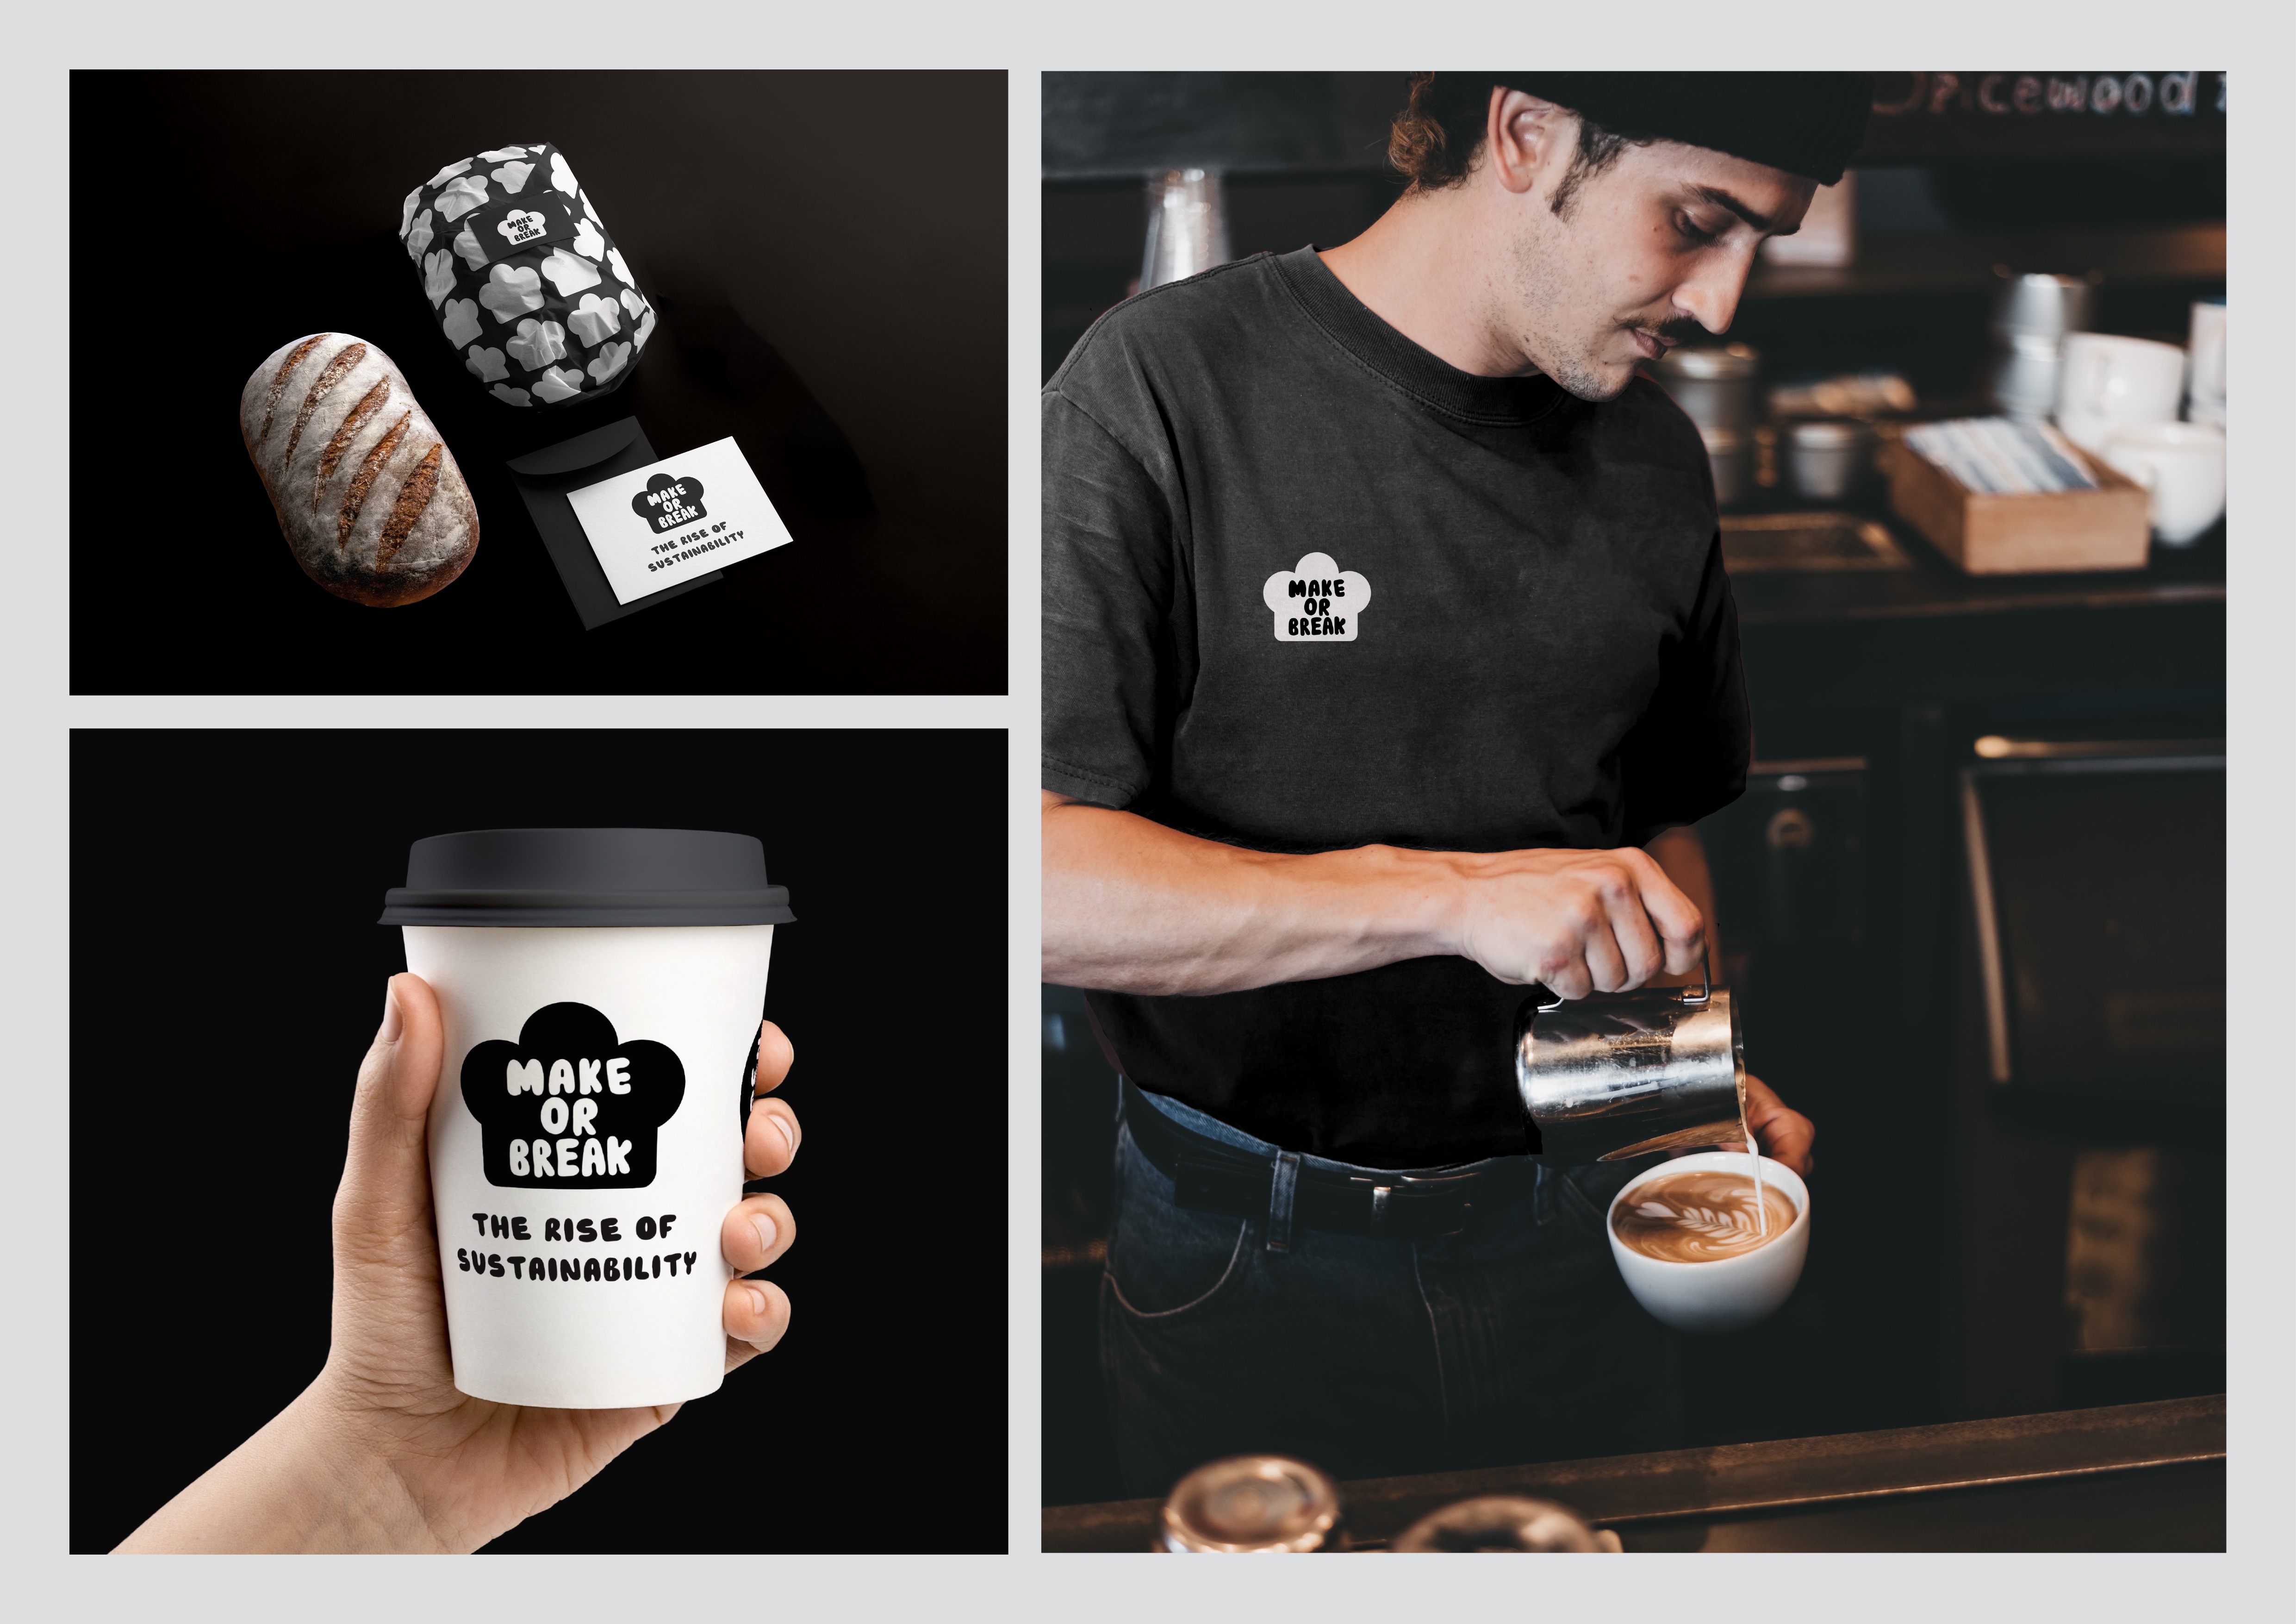 Staff uniform, coffee cups & packaging: Examples of how the ident from the logo can be used throughout the branding. Created by Hattie Holmes